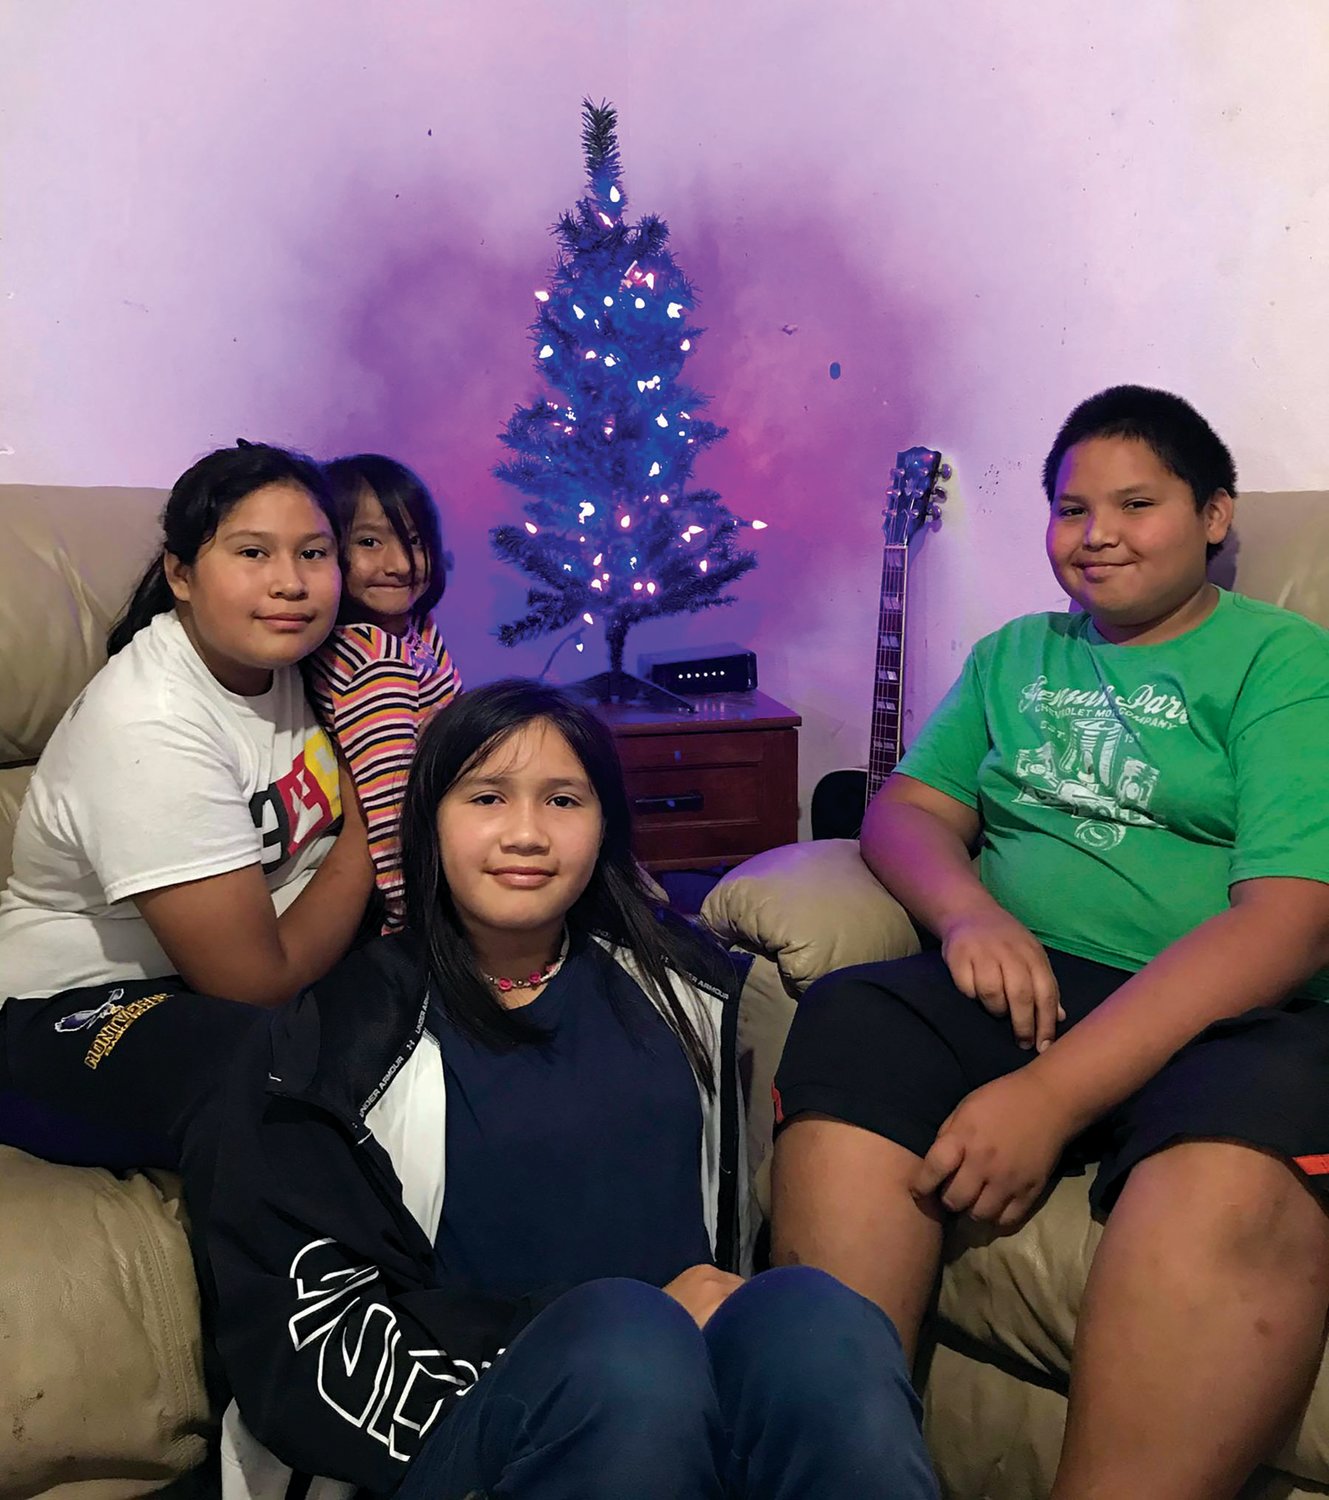 Special to the Lake Okeechobee News
The Osceola children Noah (13), Sally (11), Eleanor(10) and Hapahnee (4) pose in front of their new Christmas tree.